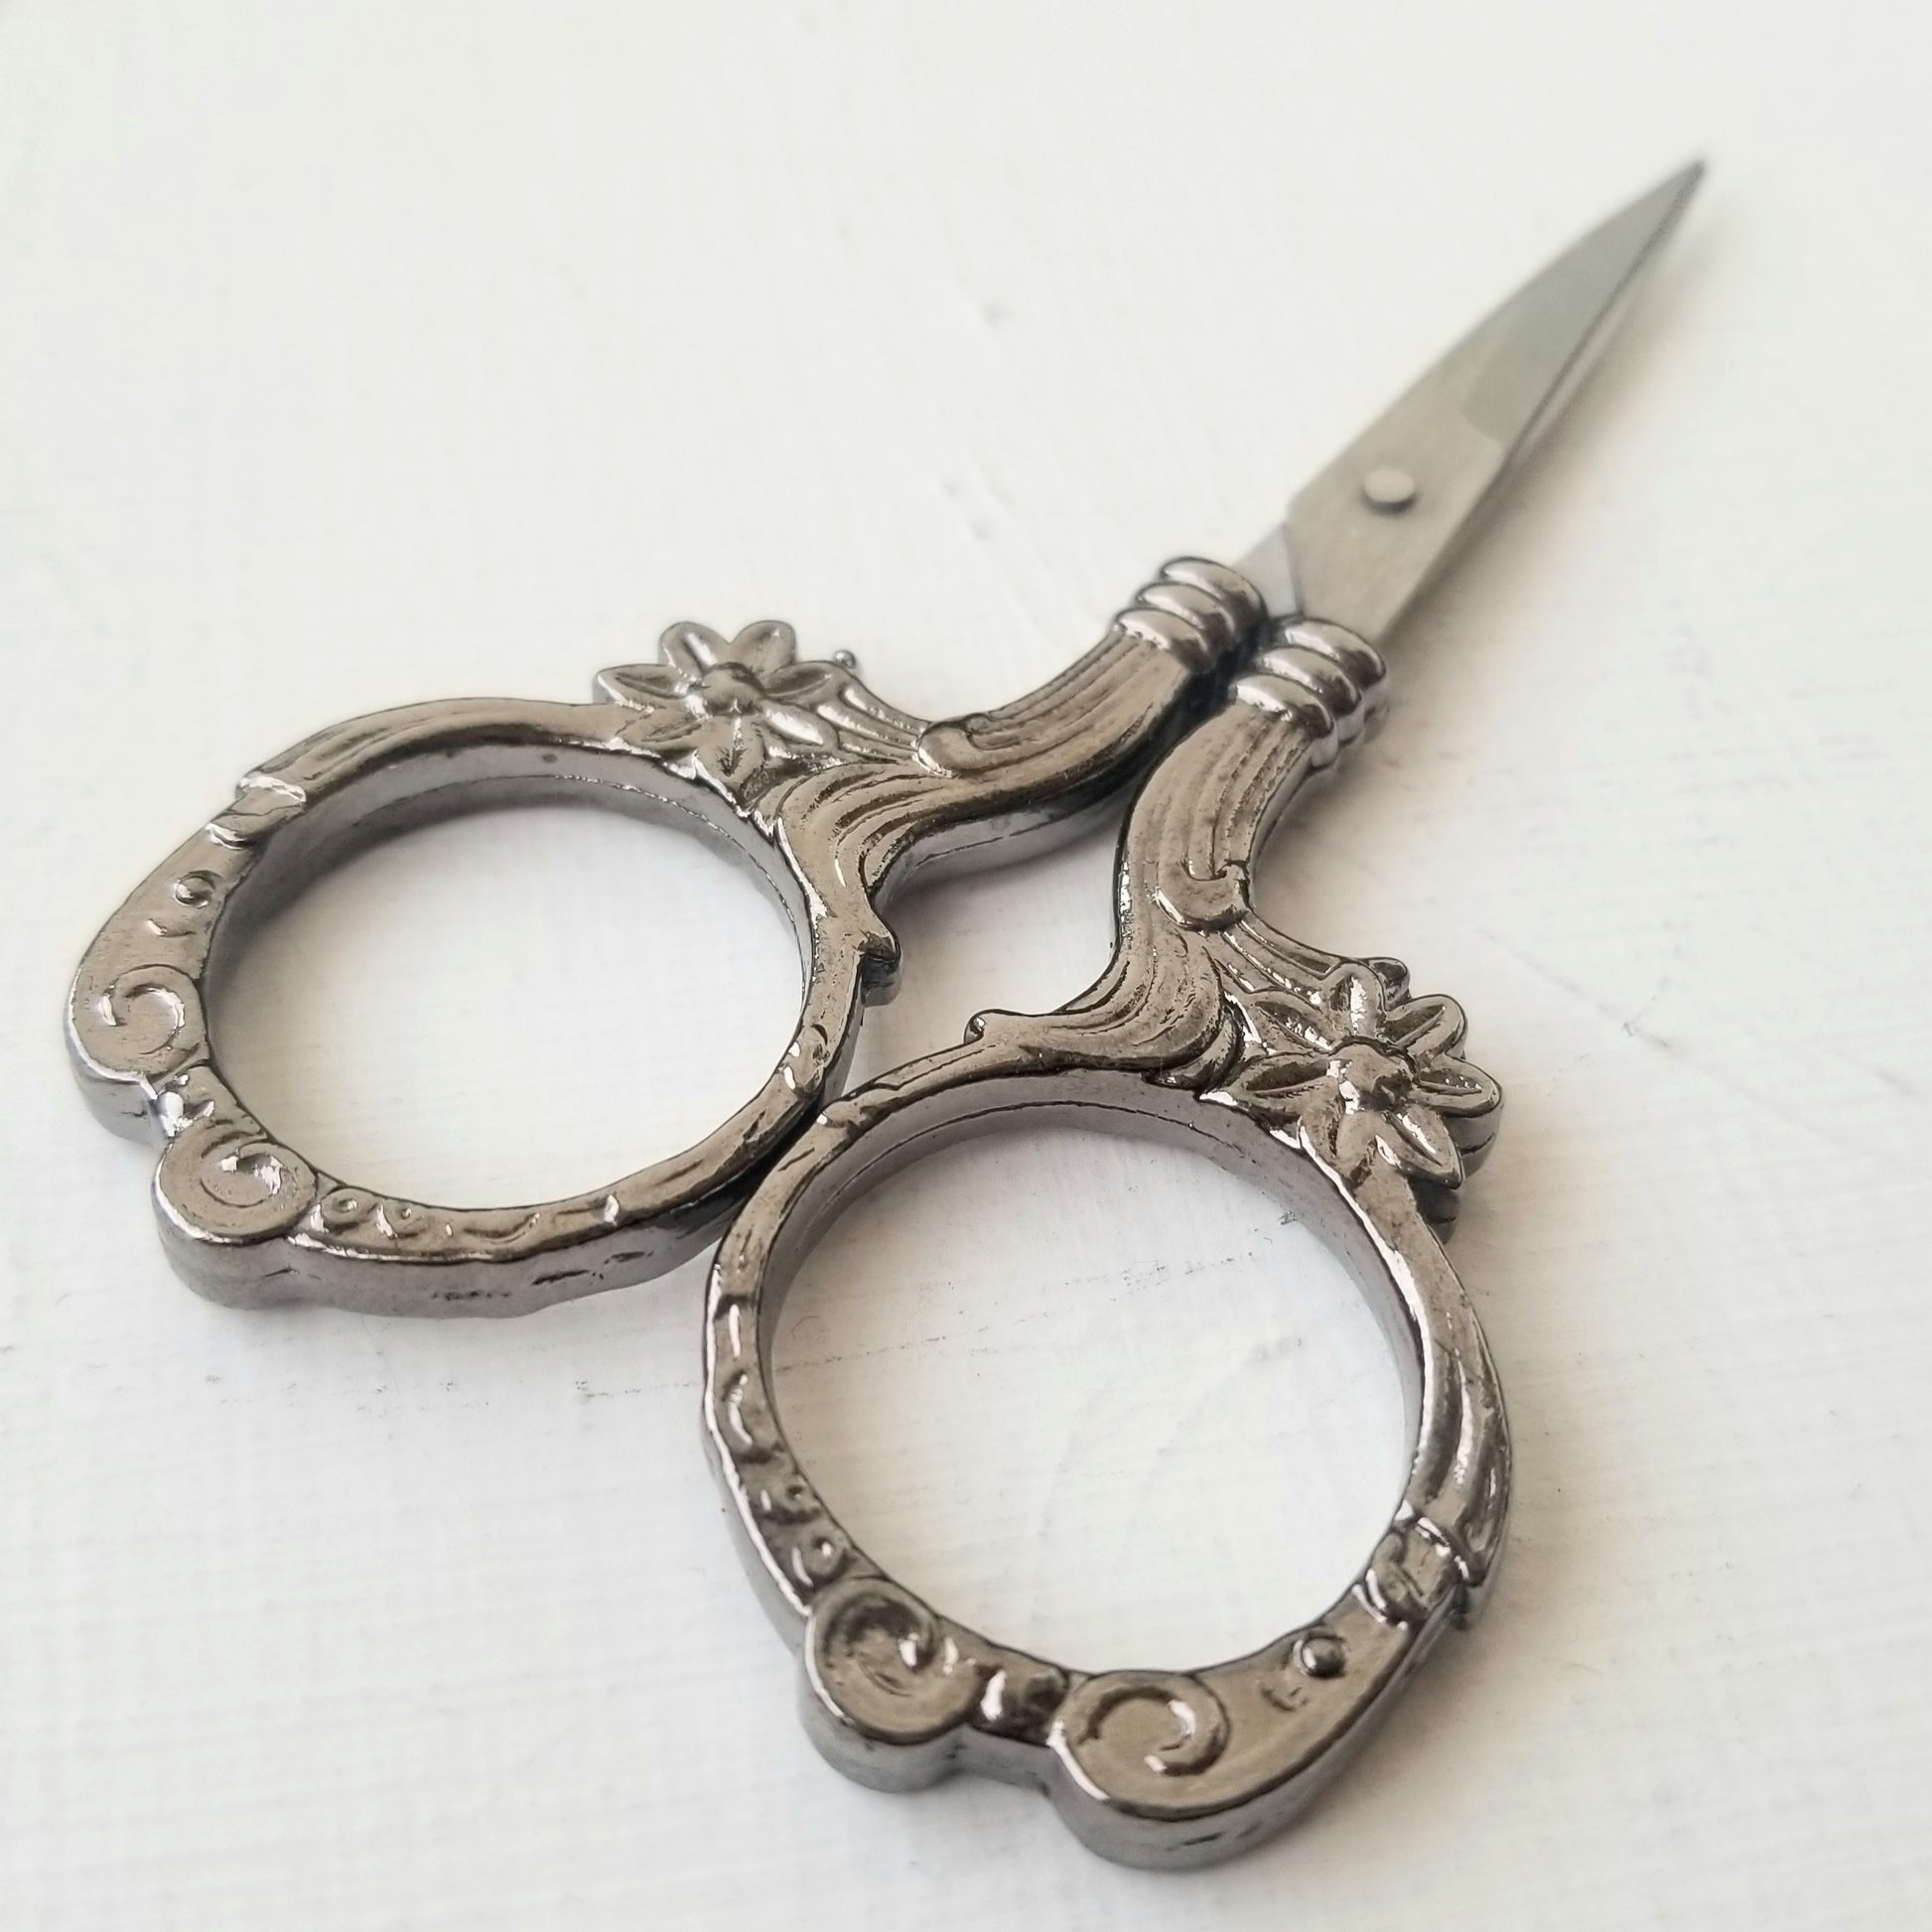 Ornate Silver Embroidery Scissors – Jessica Long Embroidery